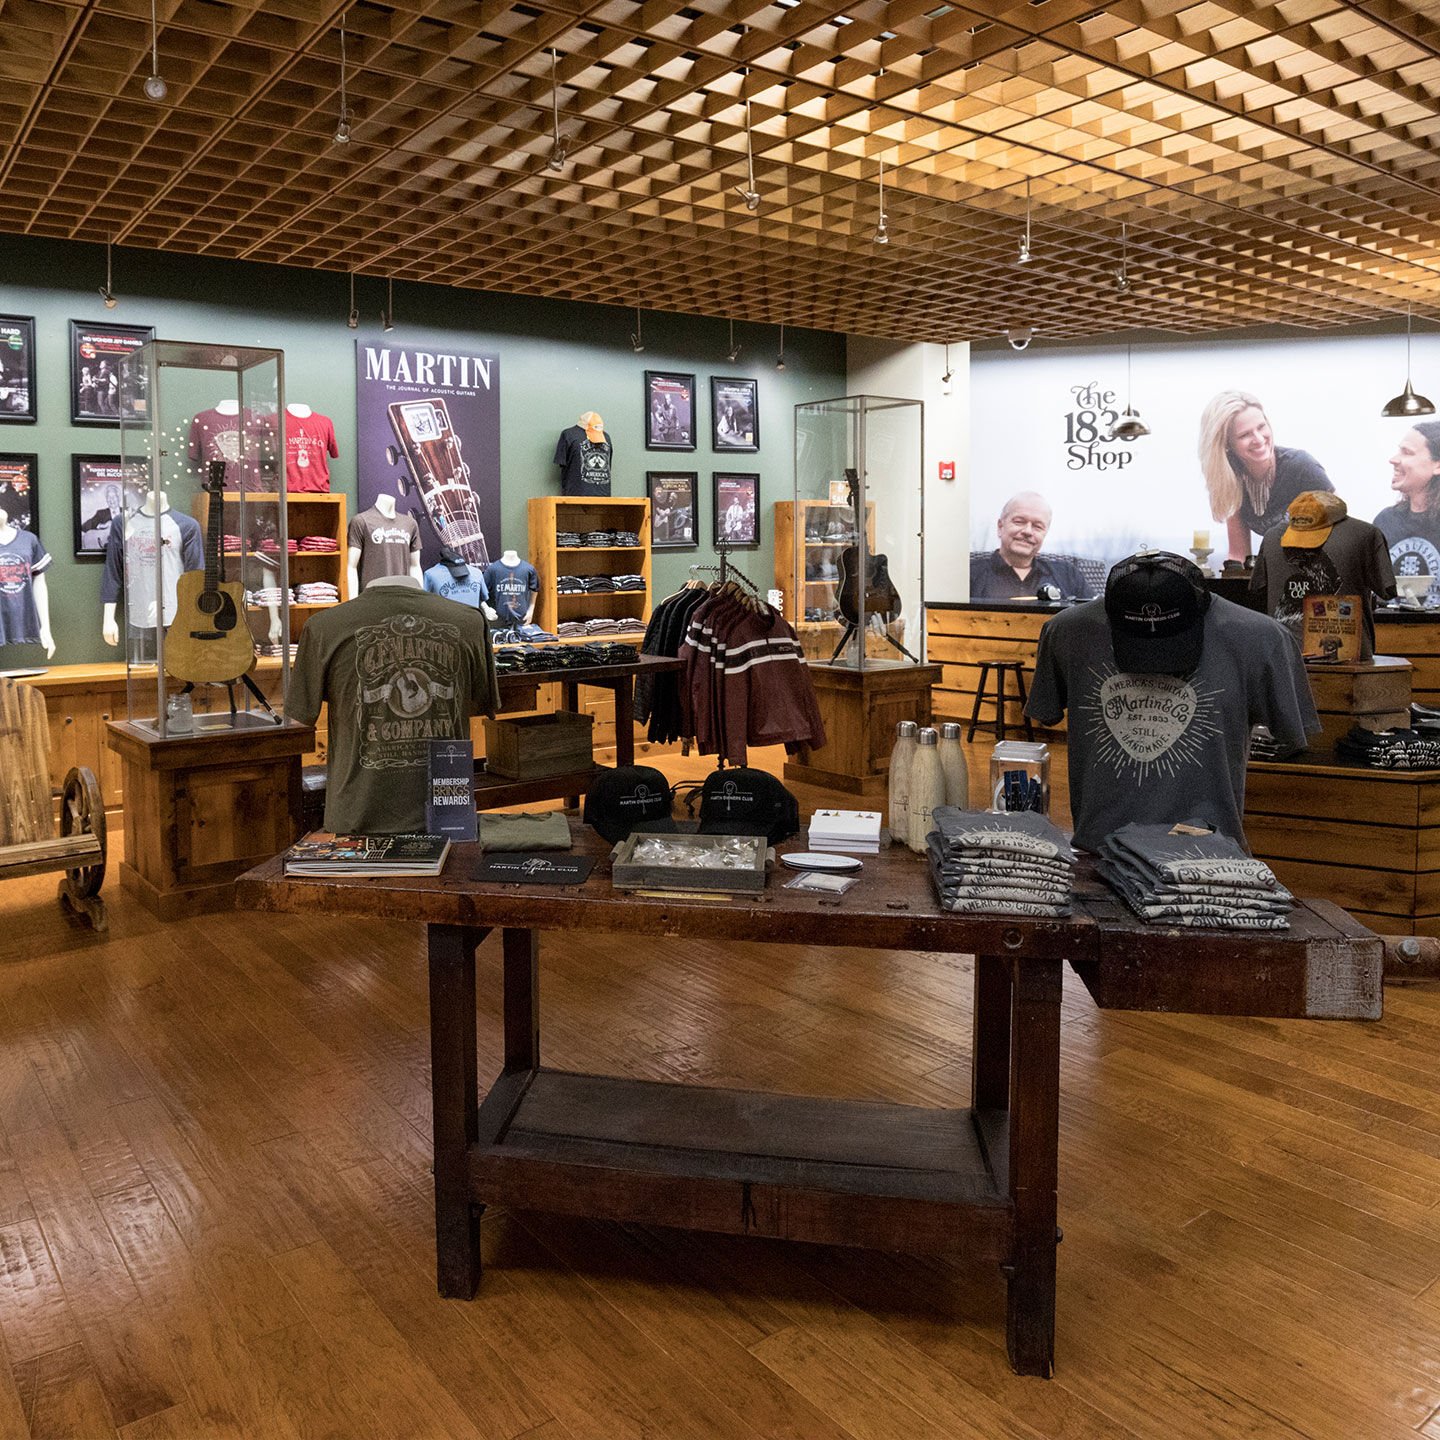 The inside of the Martin store. A latticed ceiling stands over a wooden floor and wooden tables holding merchandise such as books, t-shirts, trinkets, and guitars.